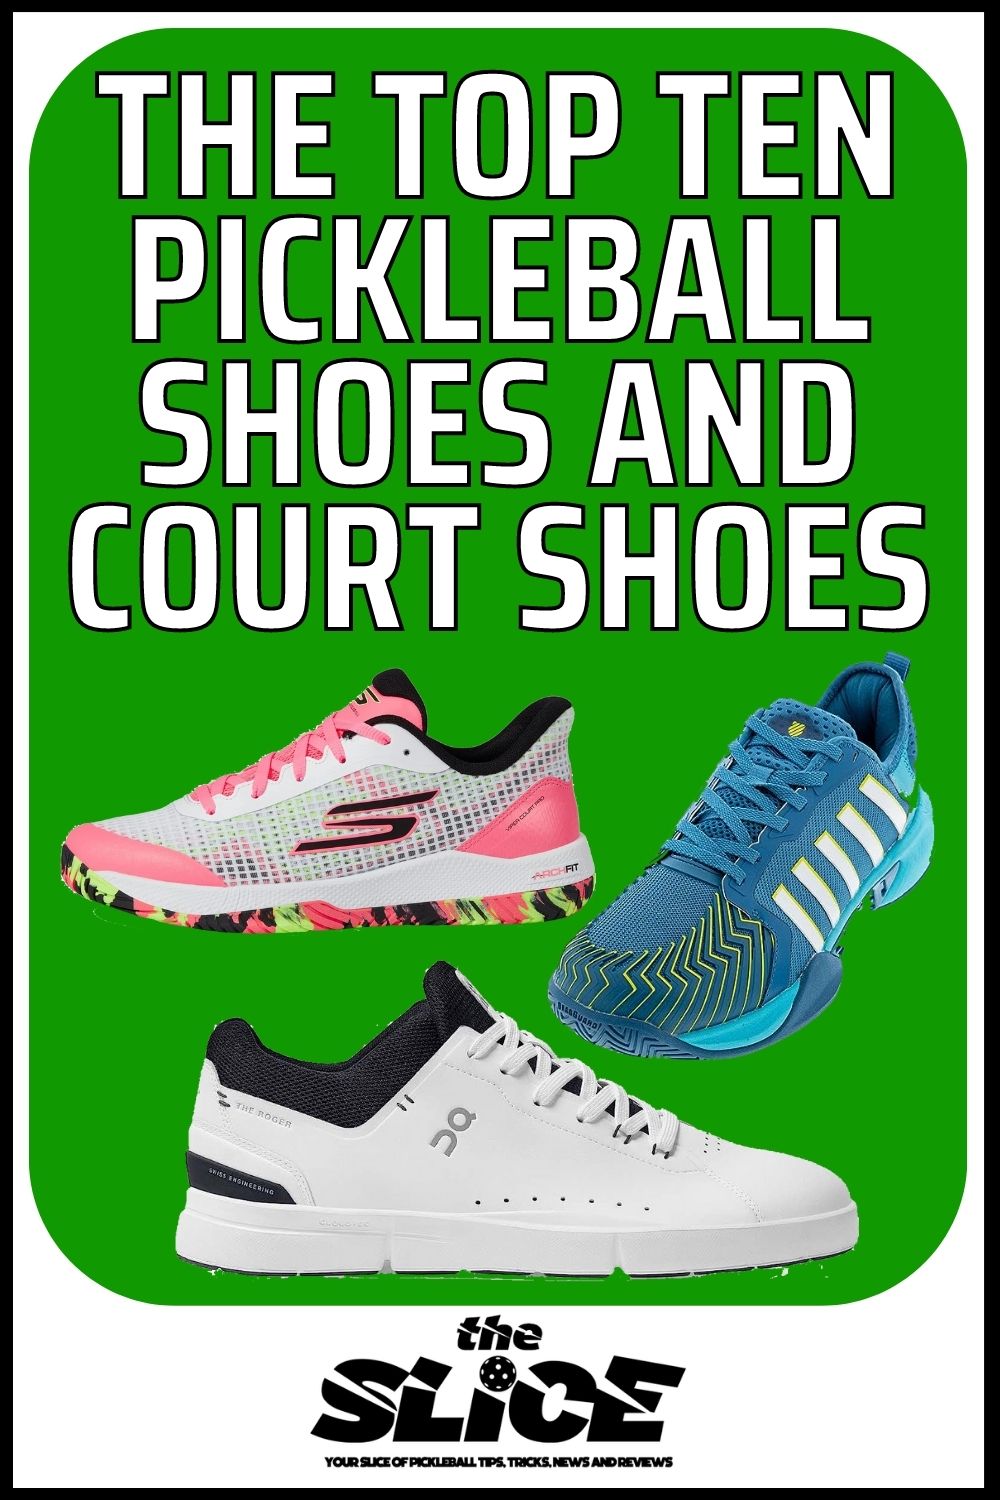 the top ten pickleball shoes and court shoes (1)